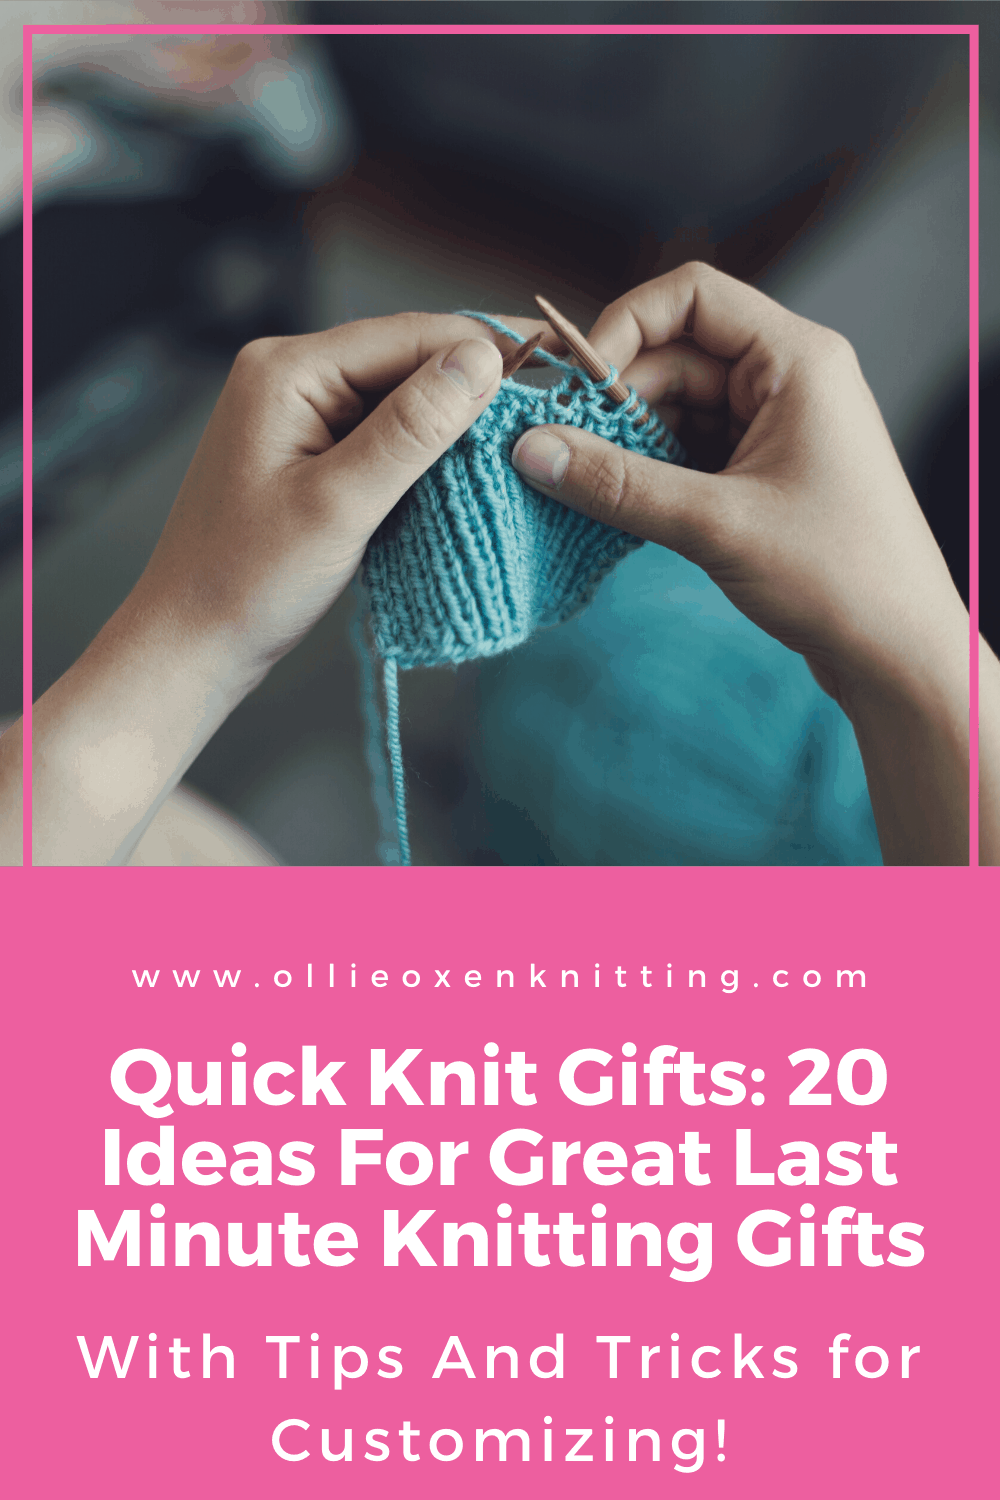 Quick Knit Gifts 20 Ideas For Great Last Minute Knitting Gifts (With